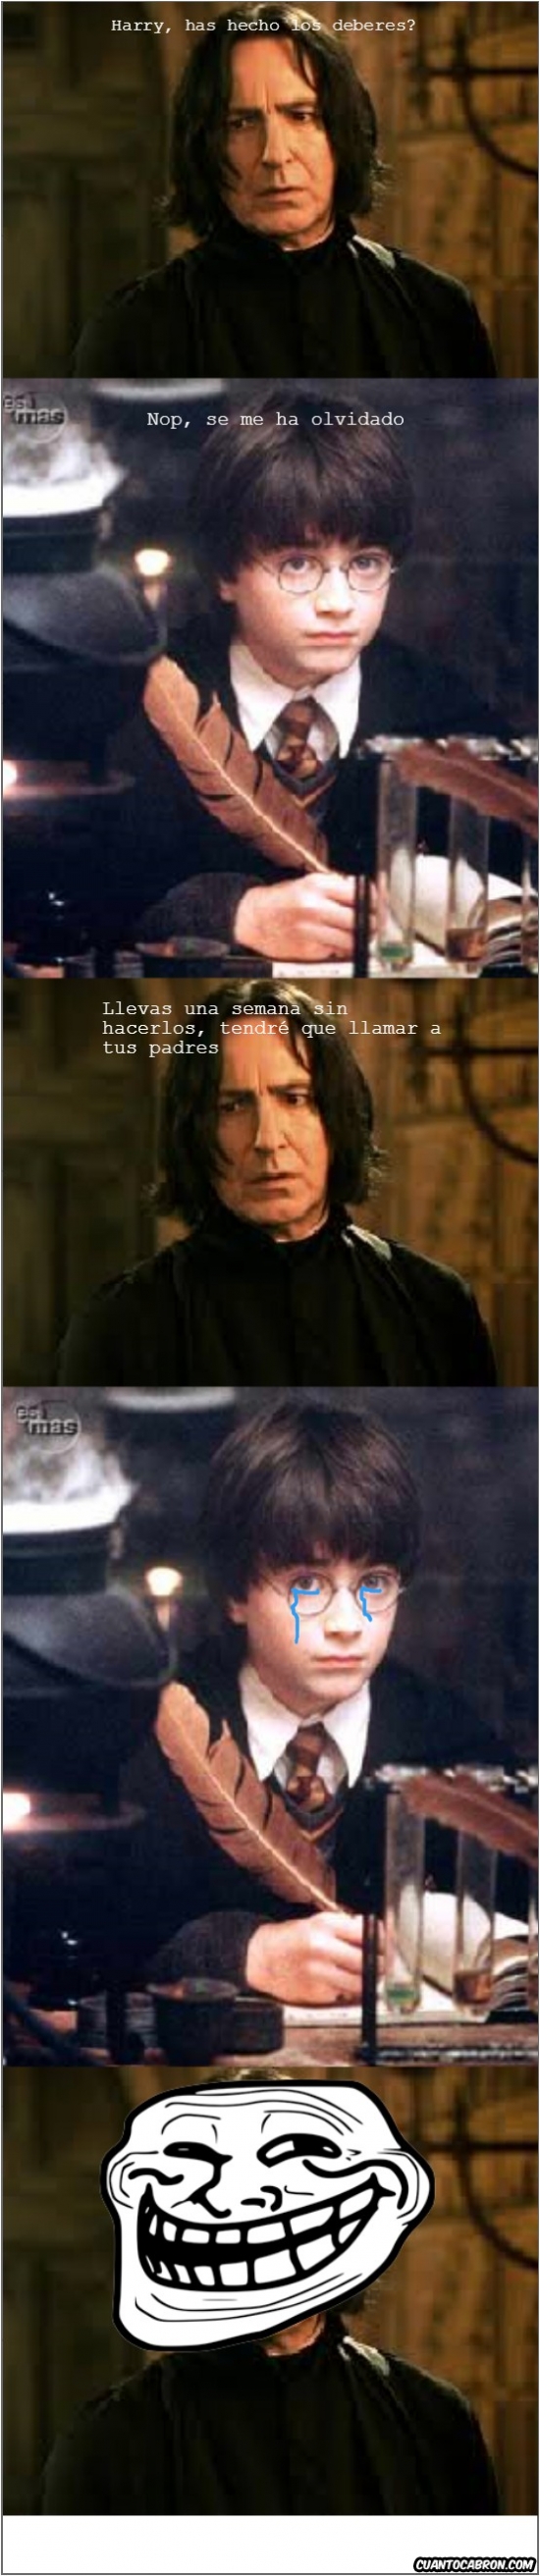 deberes,harry potter,padres,snape,troll